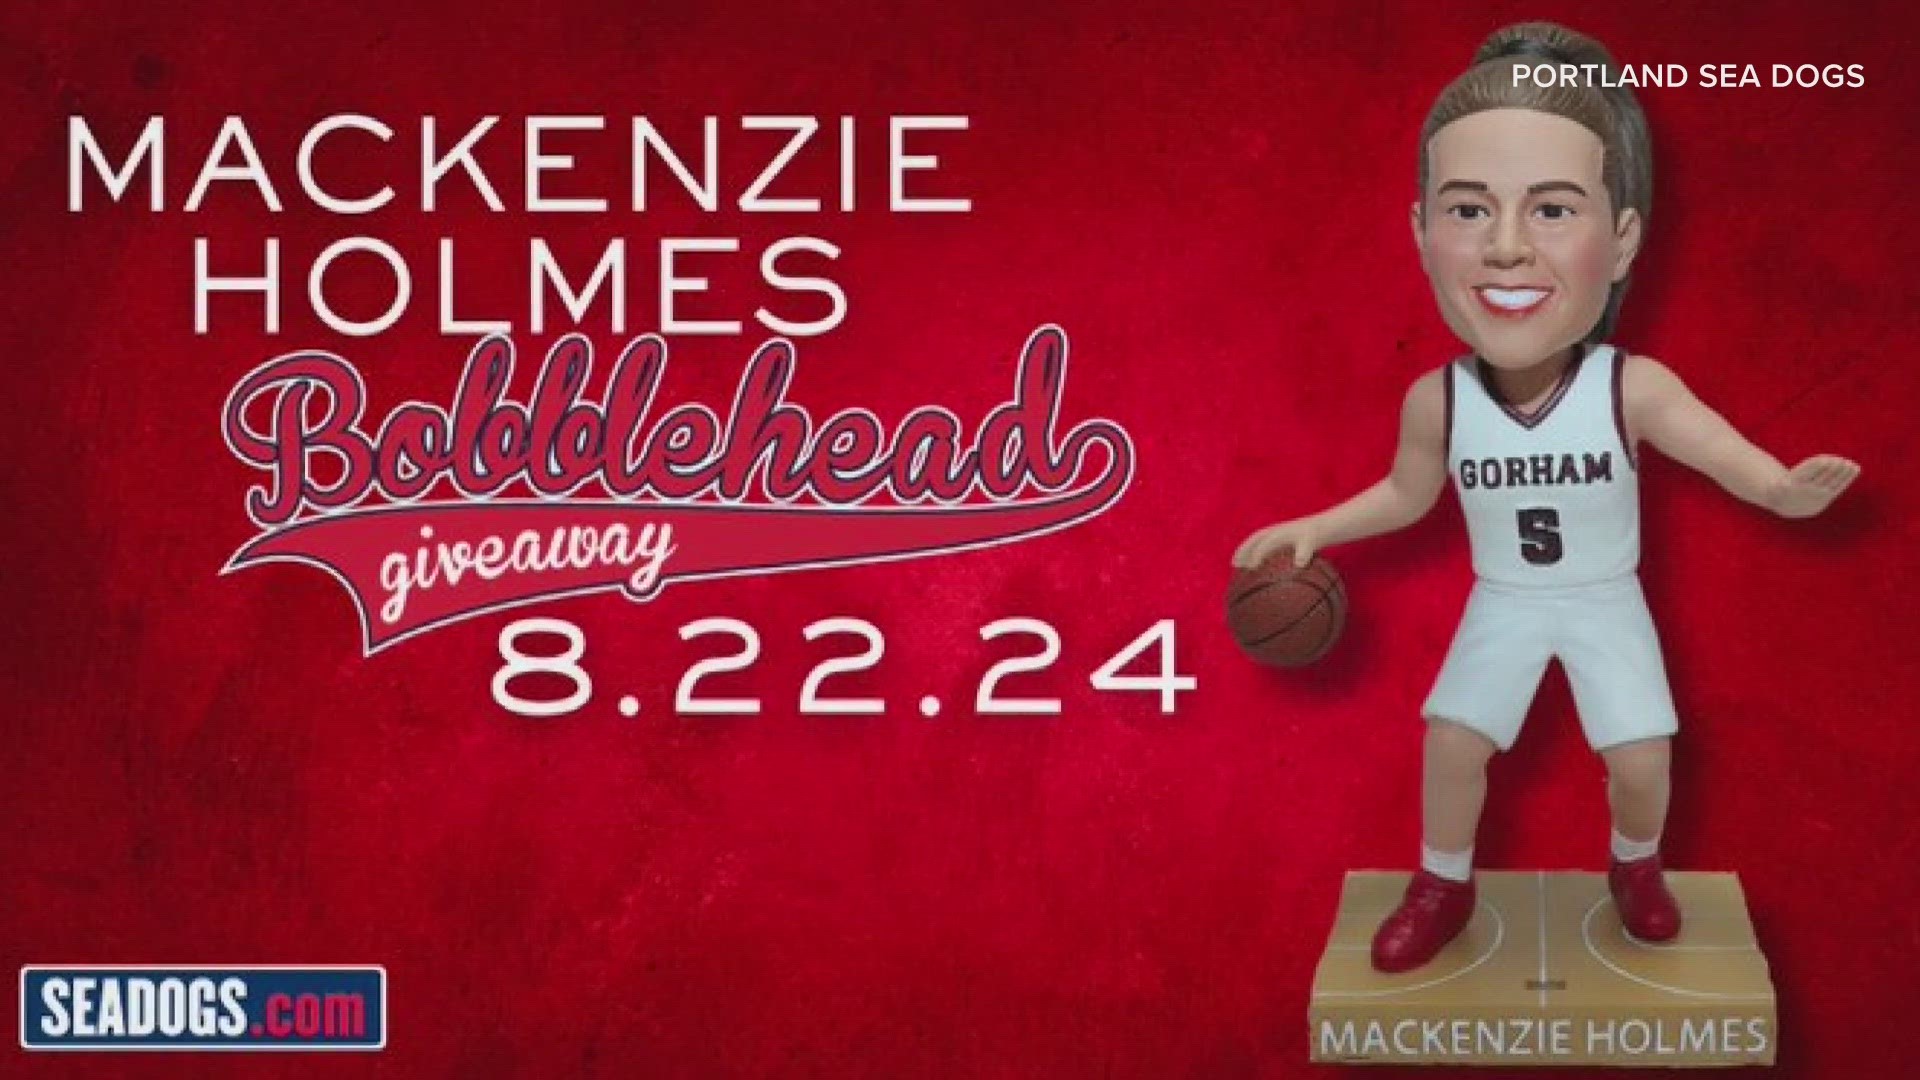 Mackenzie Holmes bobblehead figures will be given away to the first 1,000 fans at Hadlock Field on August 22.